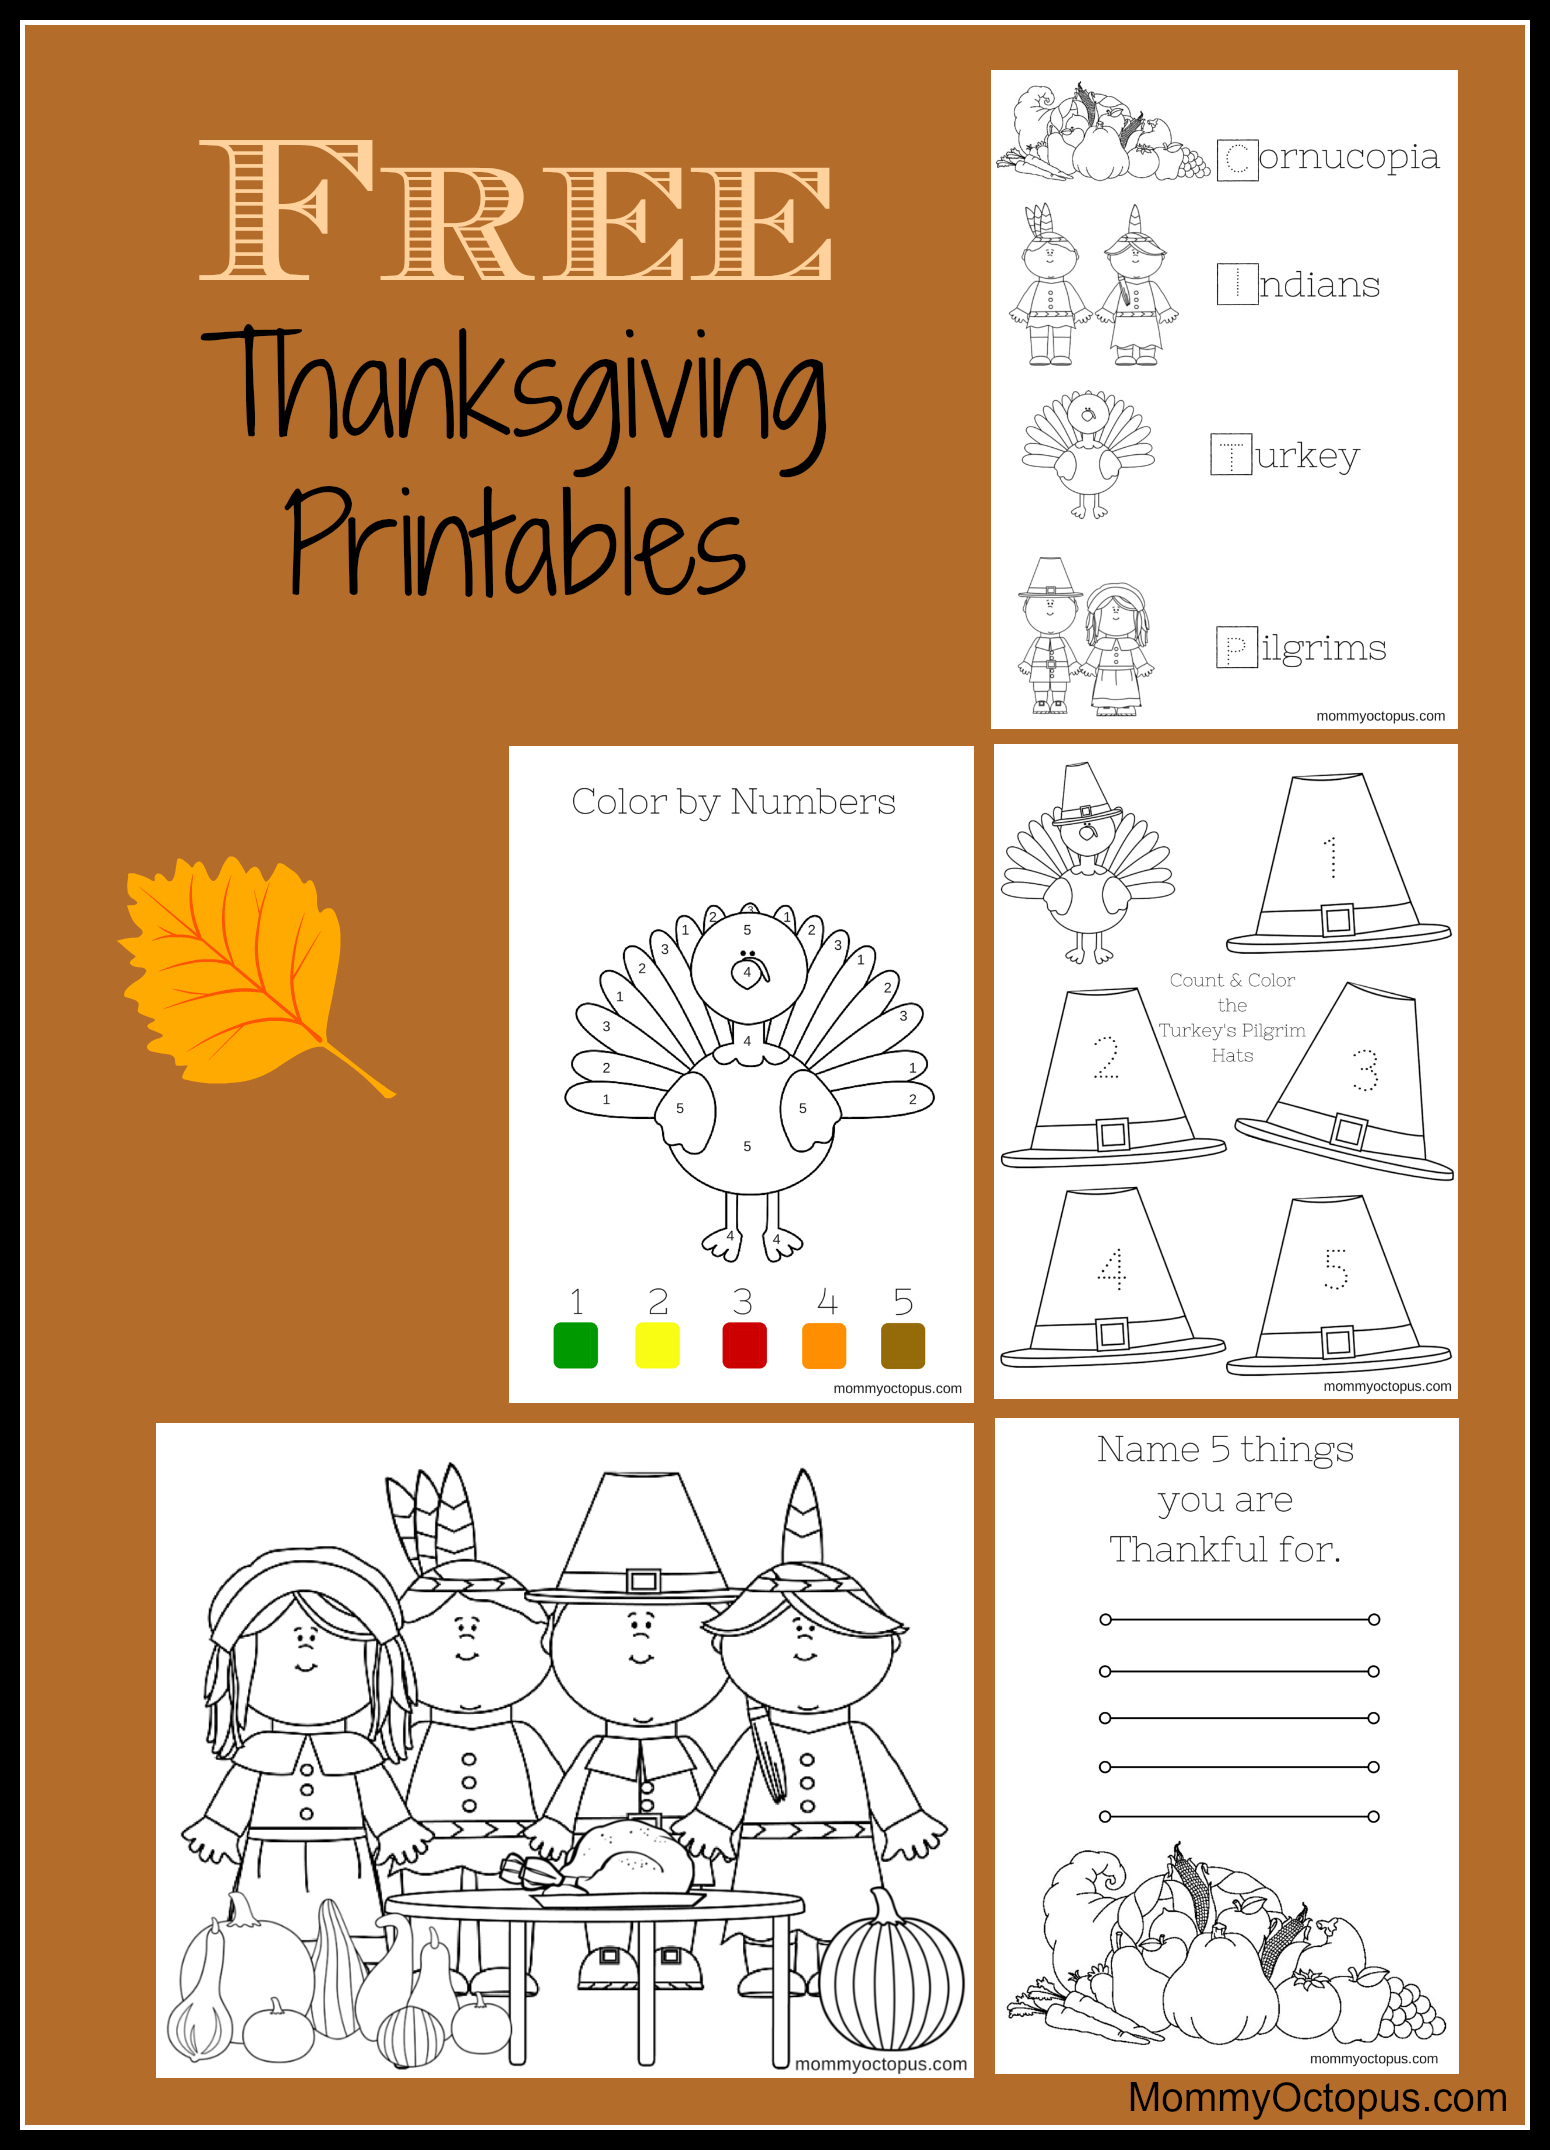 Free Thanksgiving Printable Activity Sheets! pertaining to Free Printable Kindergarten Thanksgiving Activities